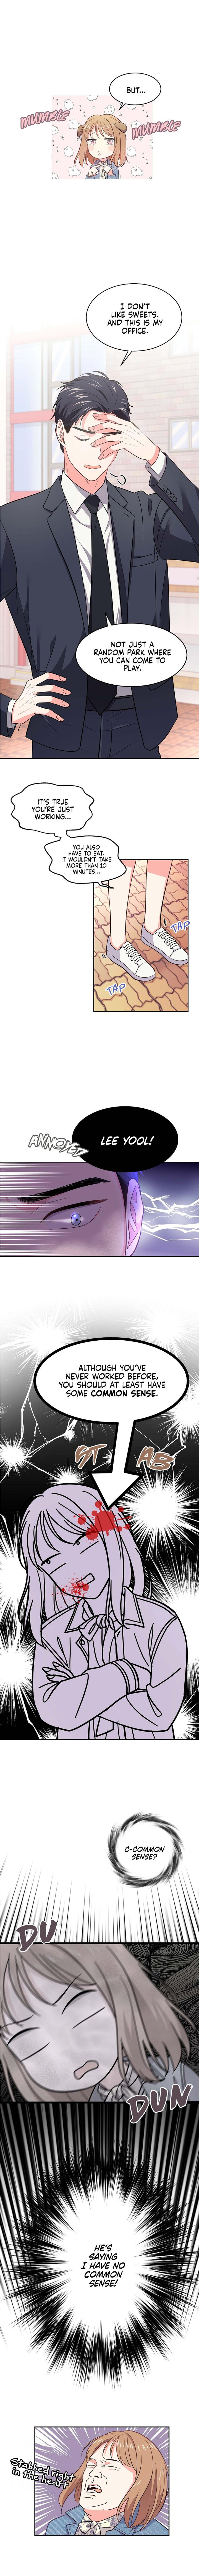 I Became a Millionaire’s daughter - Chapter 20 Page 6